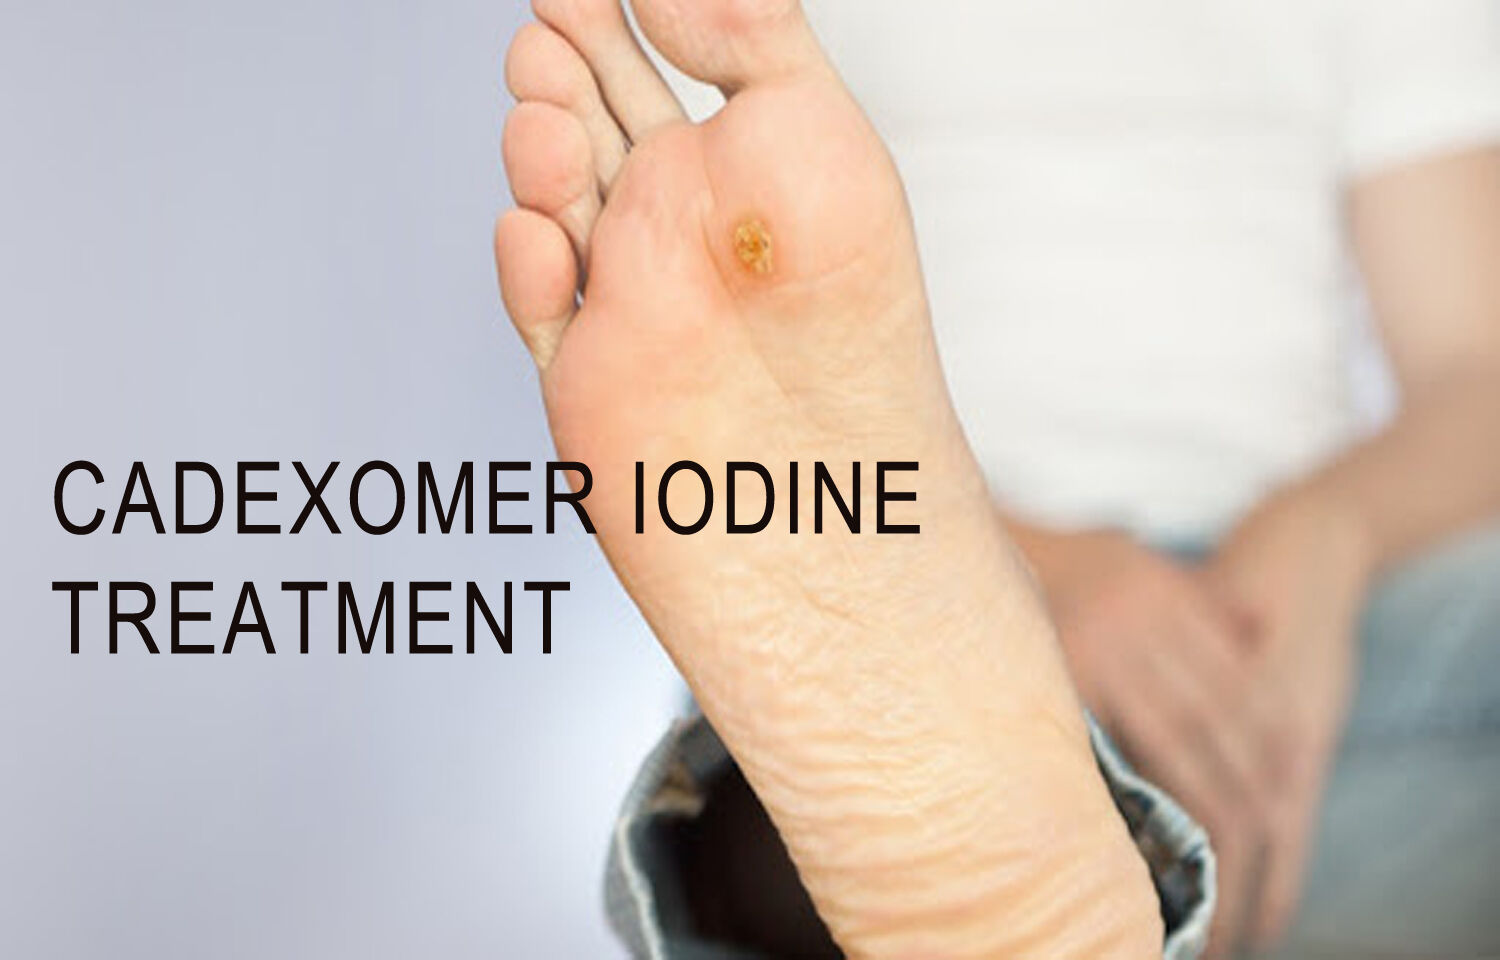 Cadexomer Iodine Treatment of Diabetic Foot Ulcers